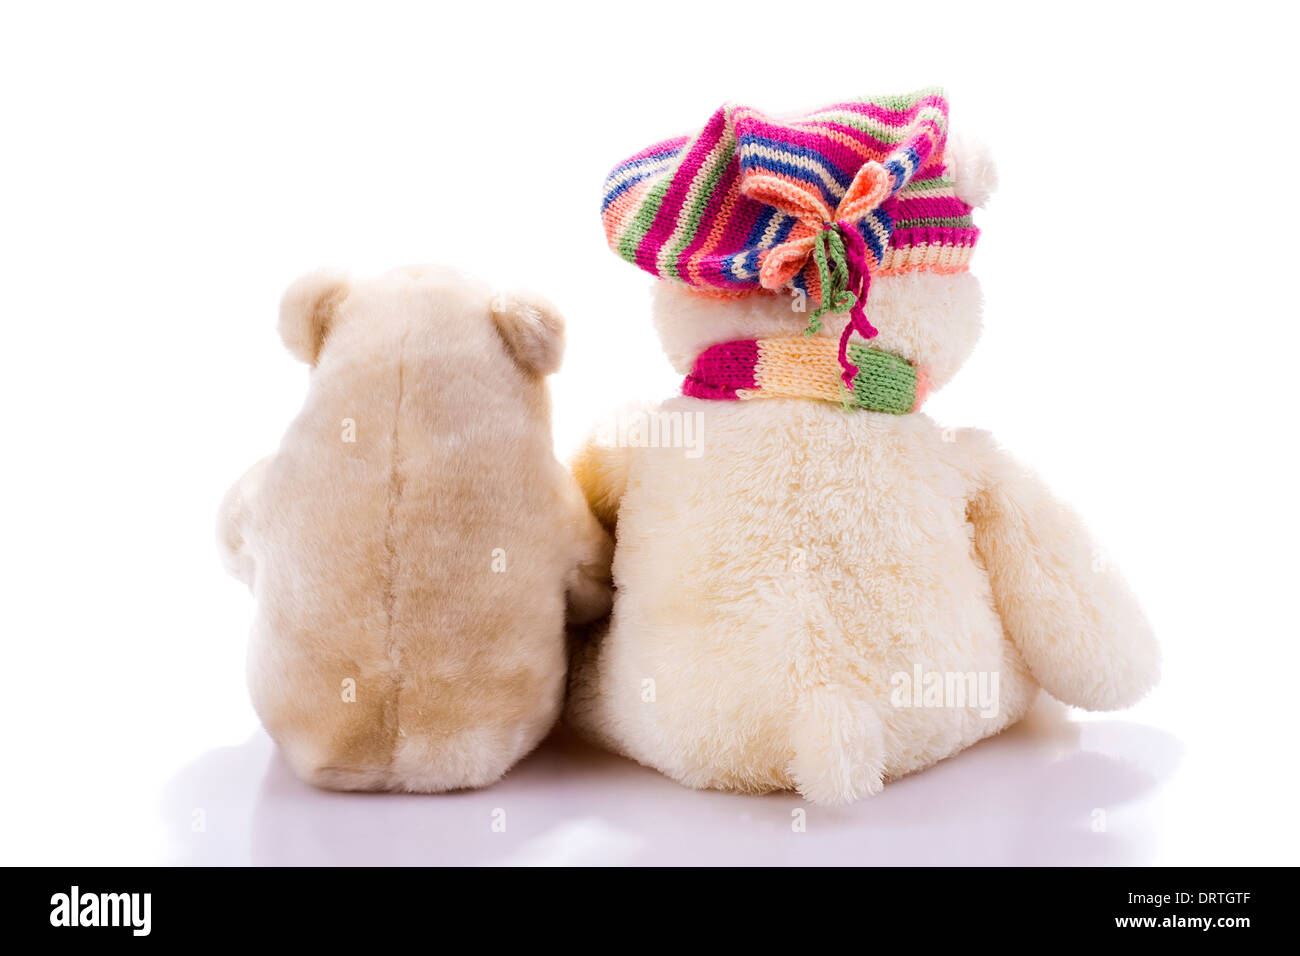 Couple of toy teddy bears from back isolated on white Stock Photo